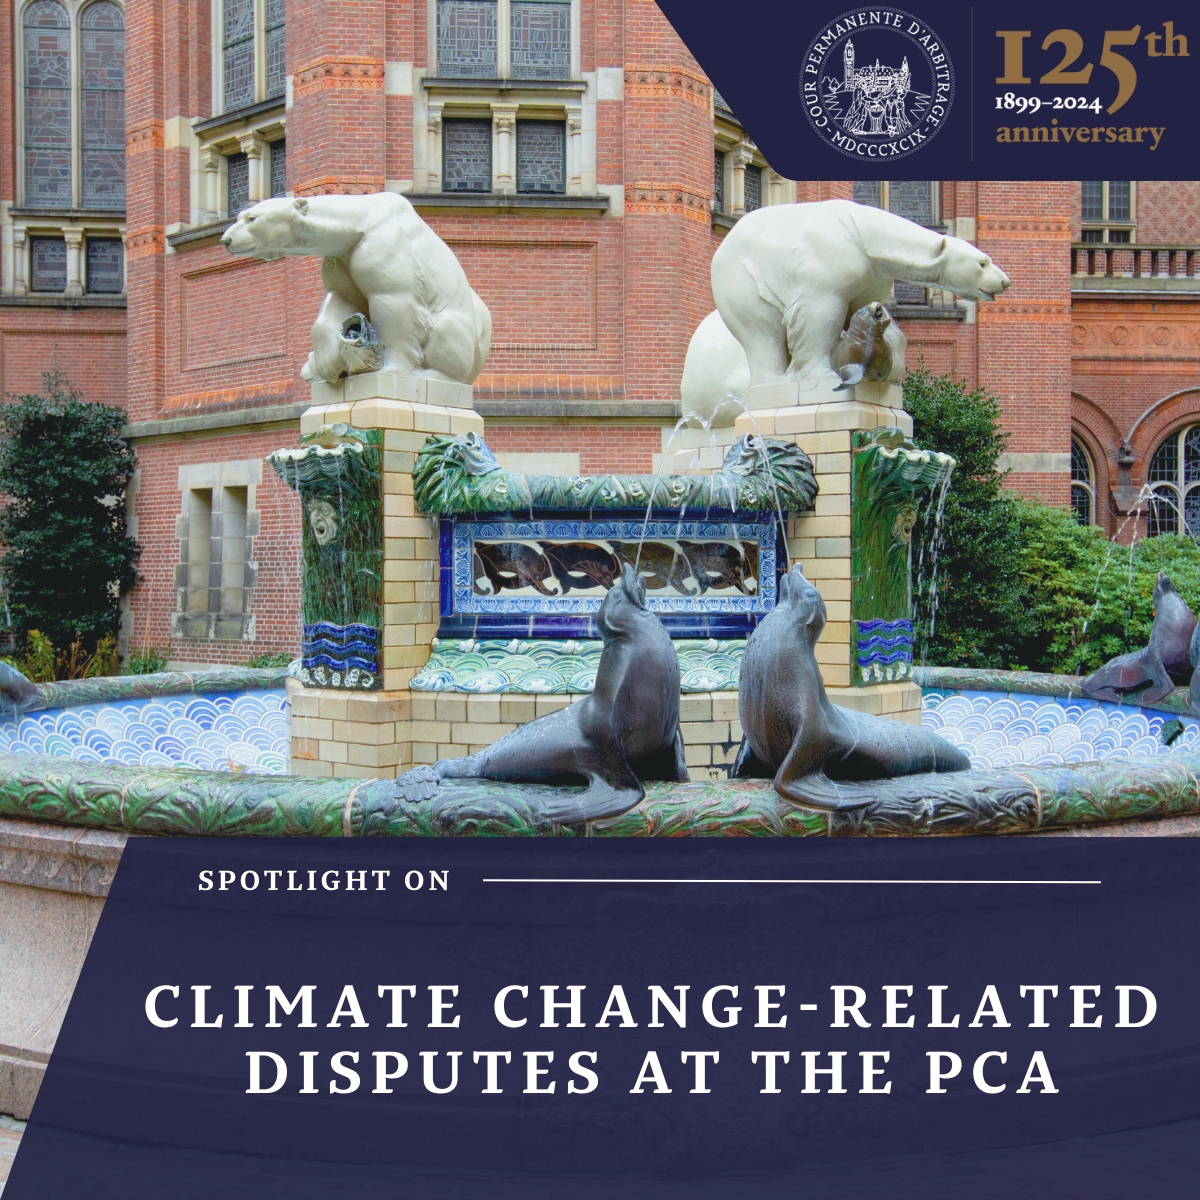 📌Spotlight on: Climate Change-related disputes at the #PCA 2/2

⚖️ #Arbitration & #conciliation are options to resolve disputes between States under the core #climatechange treaties & the #PCA has already handled cases arising from the #KyotoProtocol ➡ bit.ly/3sEdJDF